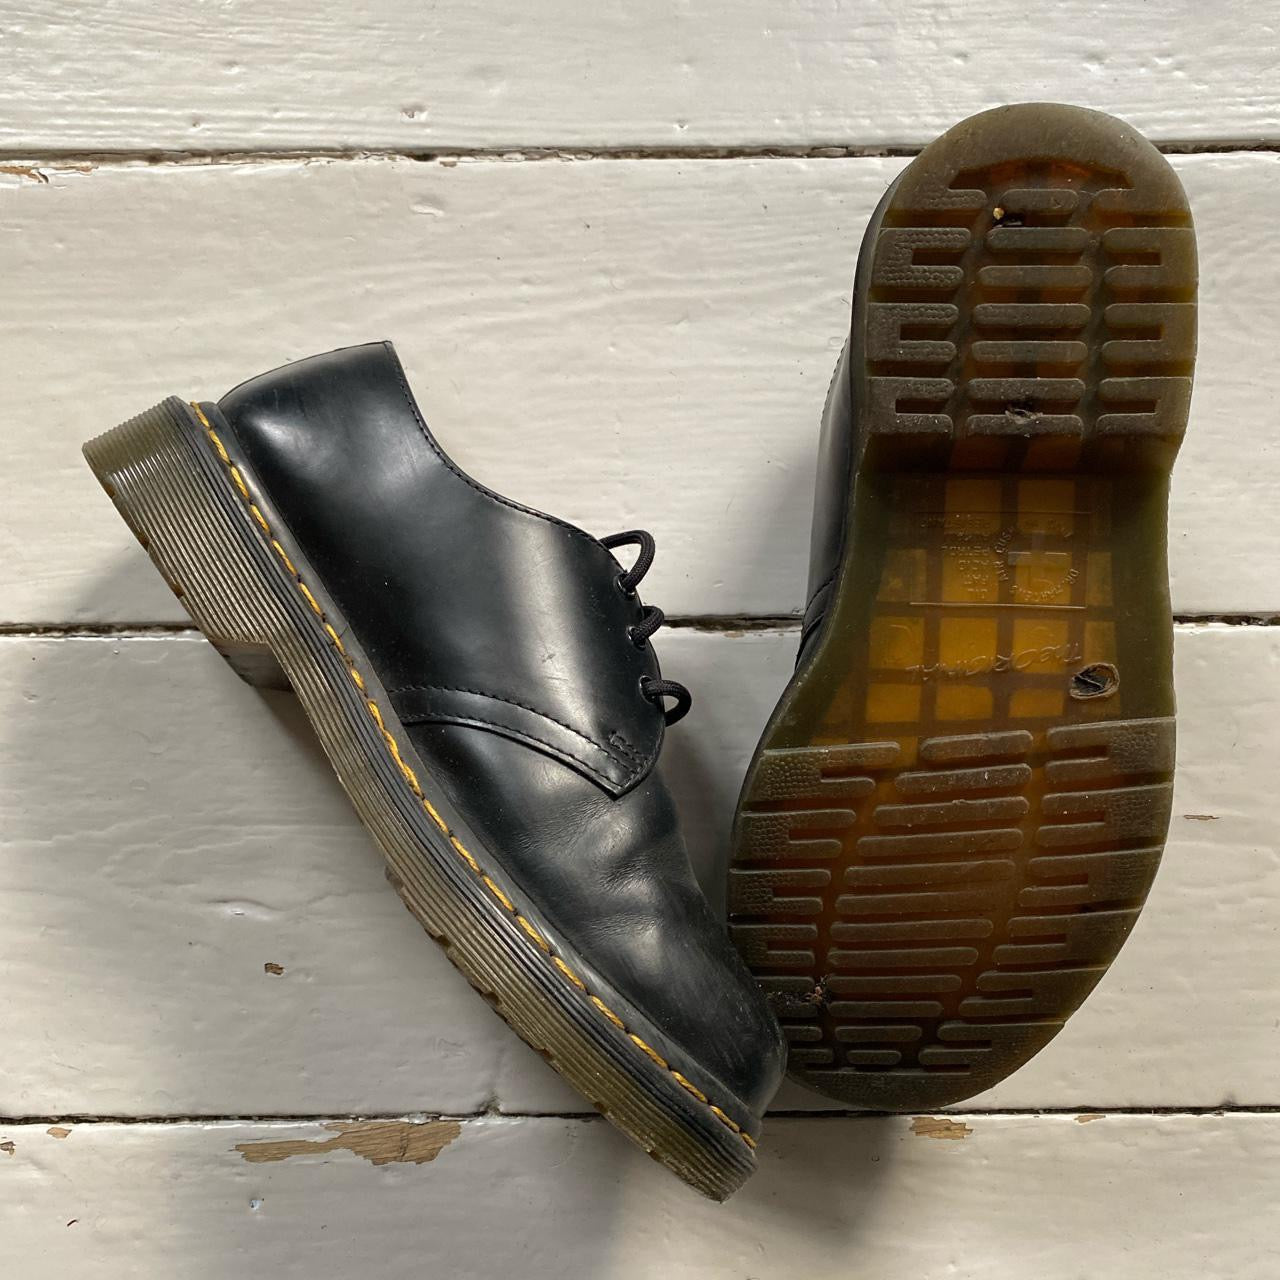 Dr Martens Low Leather Shoes (UK 5)